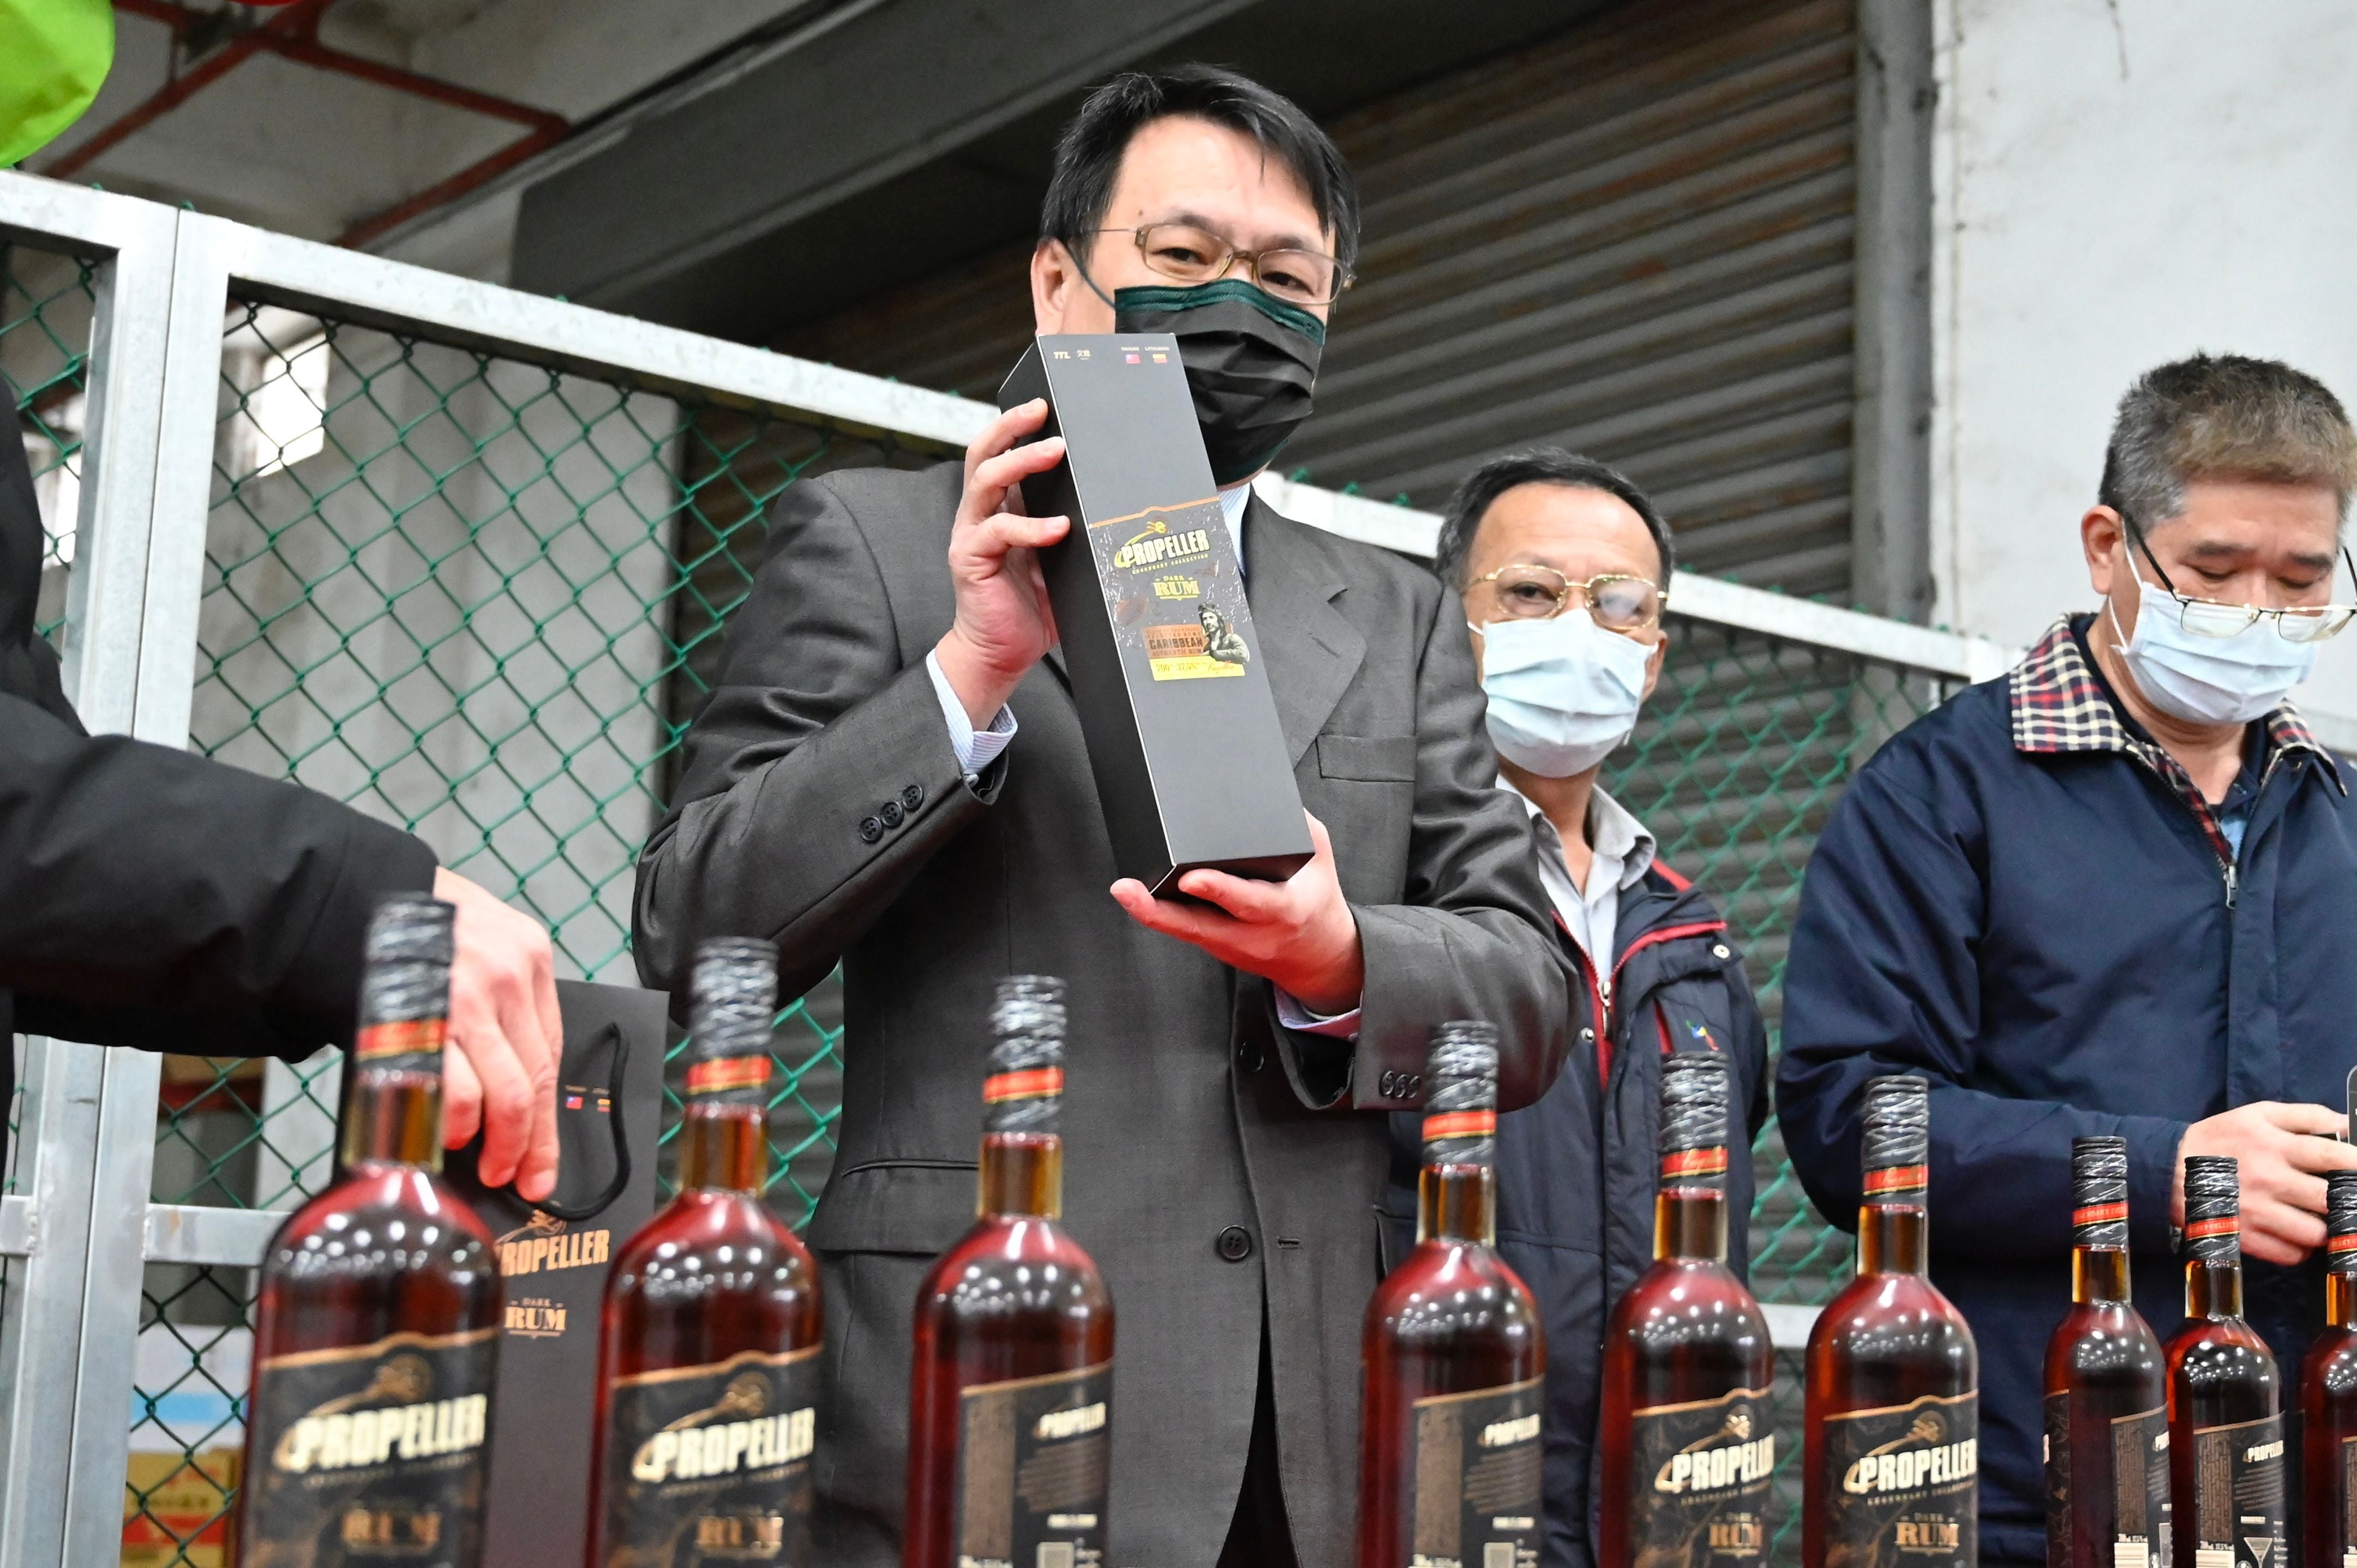 Ting Yen-che, Chairman of Taiwan Tobacco and Liquor Corp, poses with bottles of Lithuanian rum